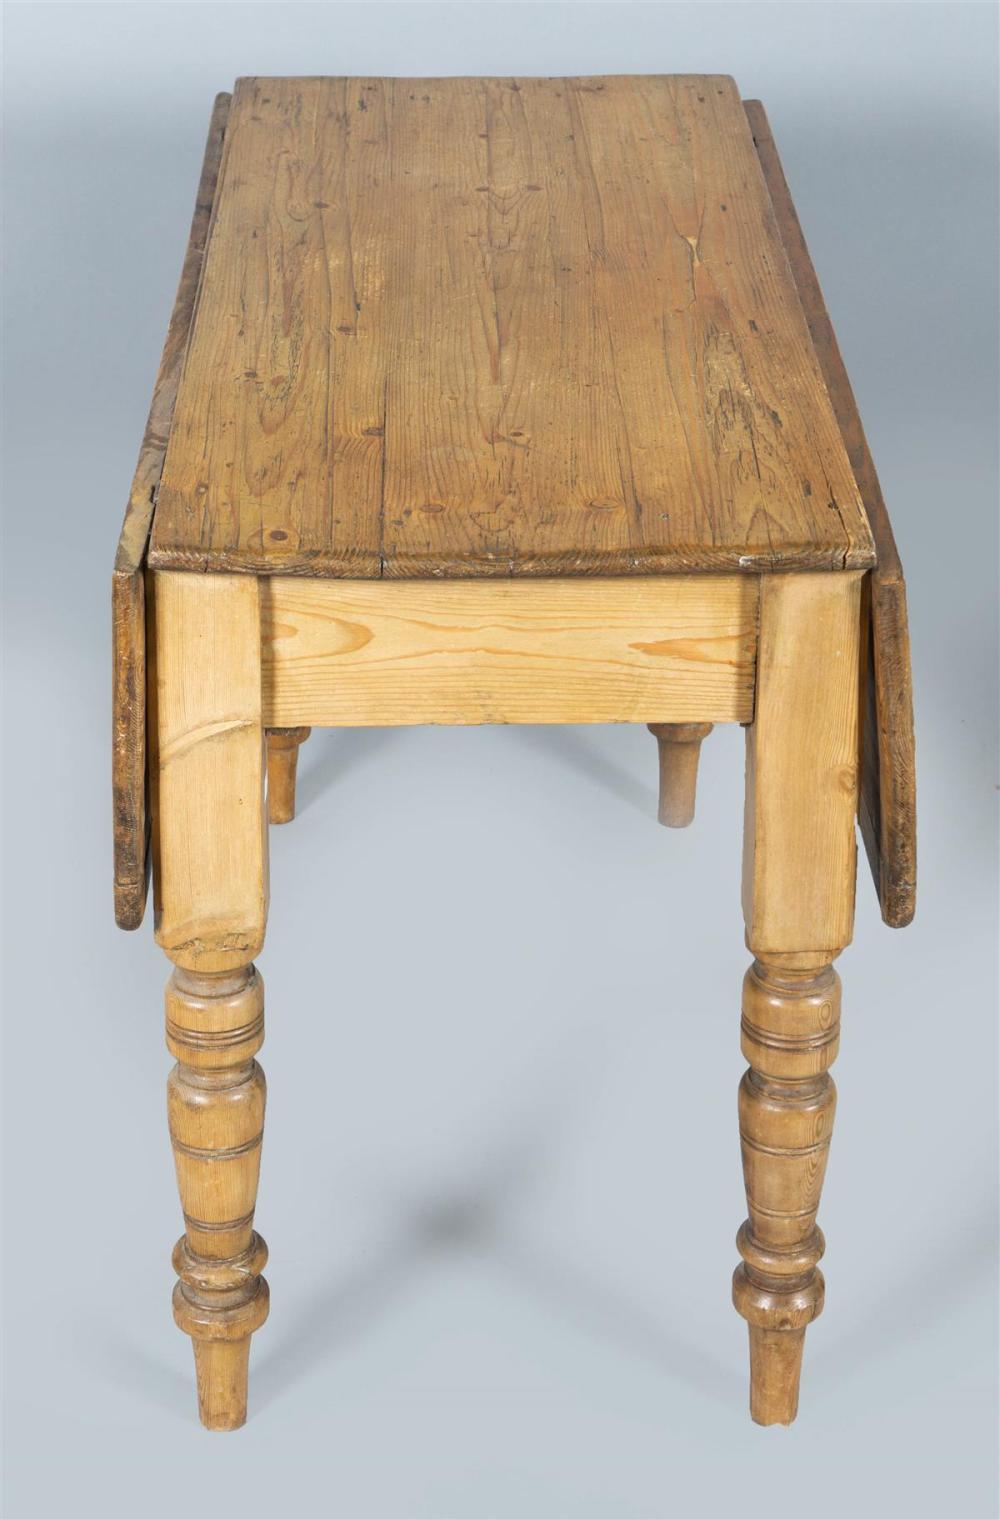 COUNTRY PINE DROP LEAF TABLE 29 33c627